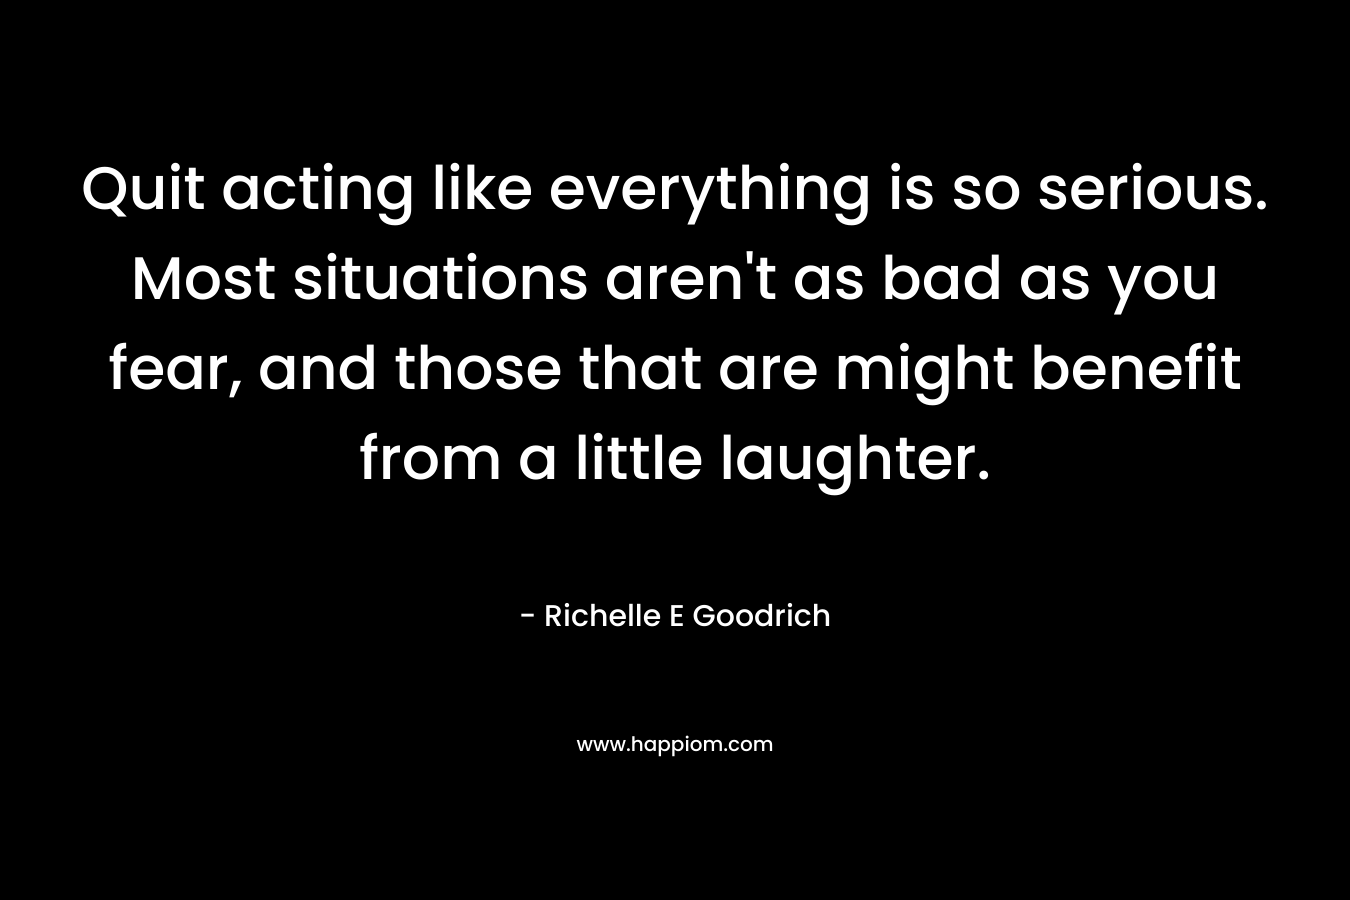 Quit acting like everything is so serious. Most situations aren't as bad as you fear, and those that are might benefit from a little laughter.